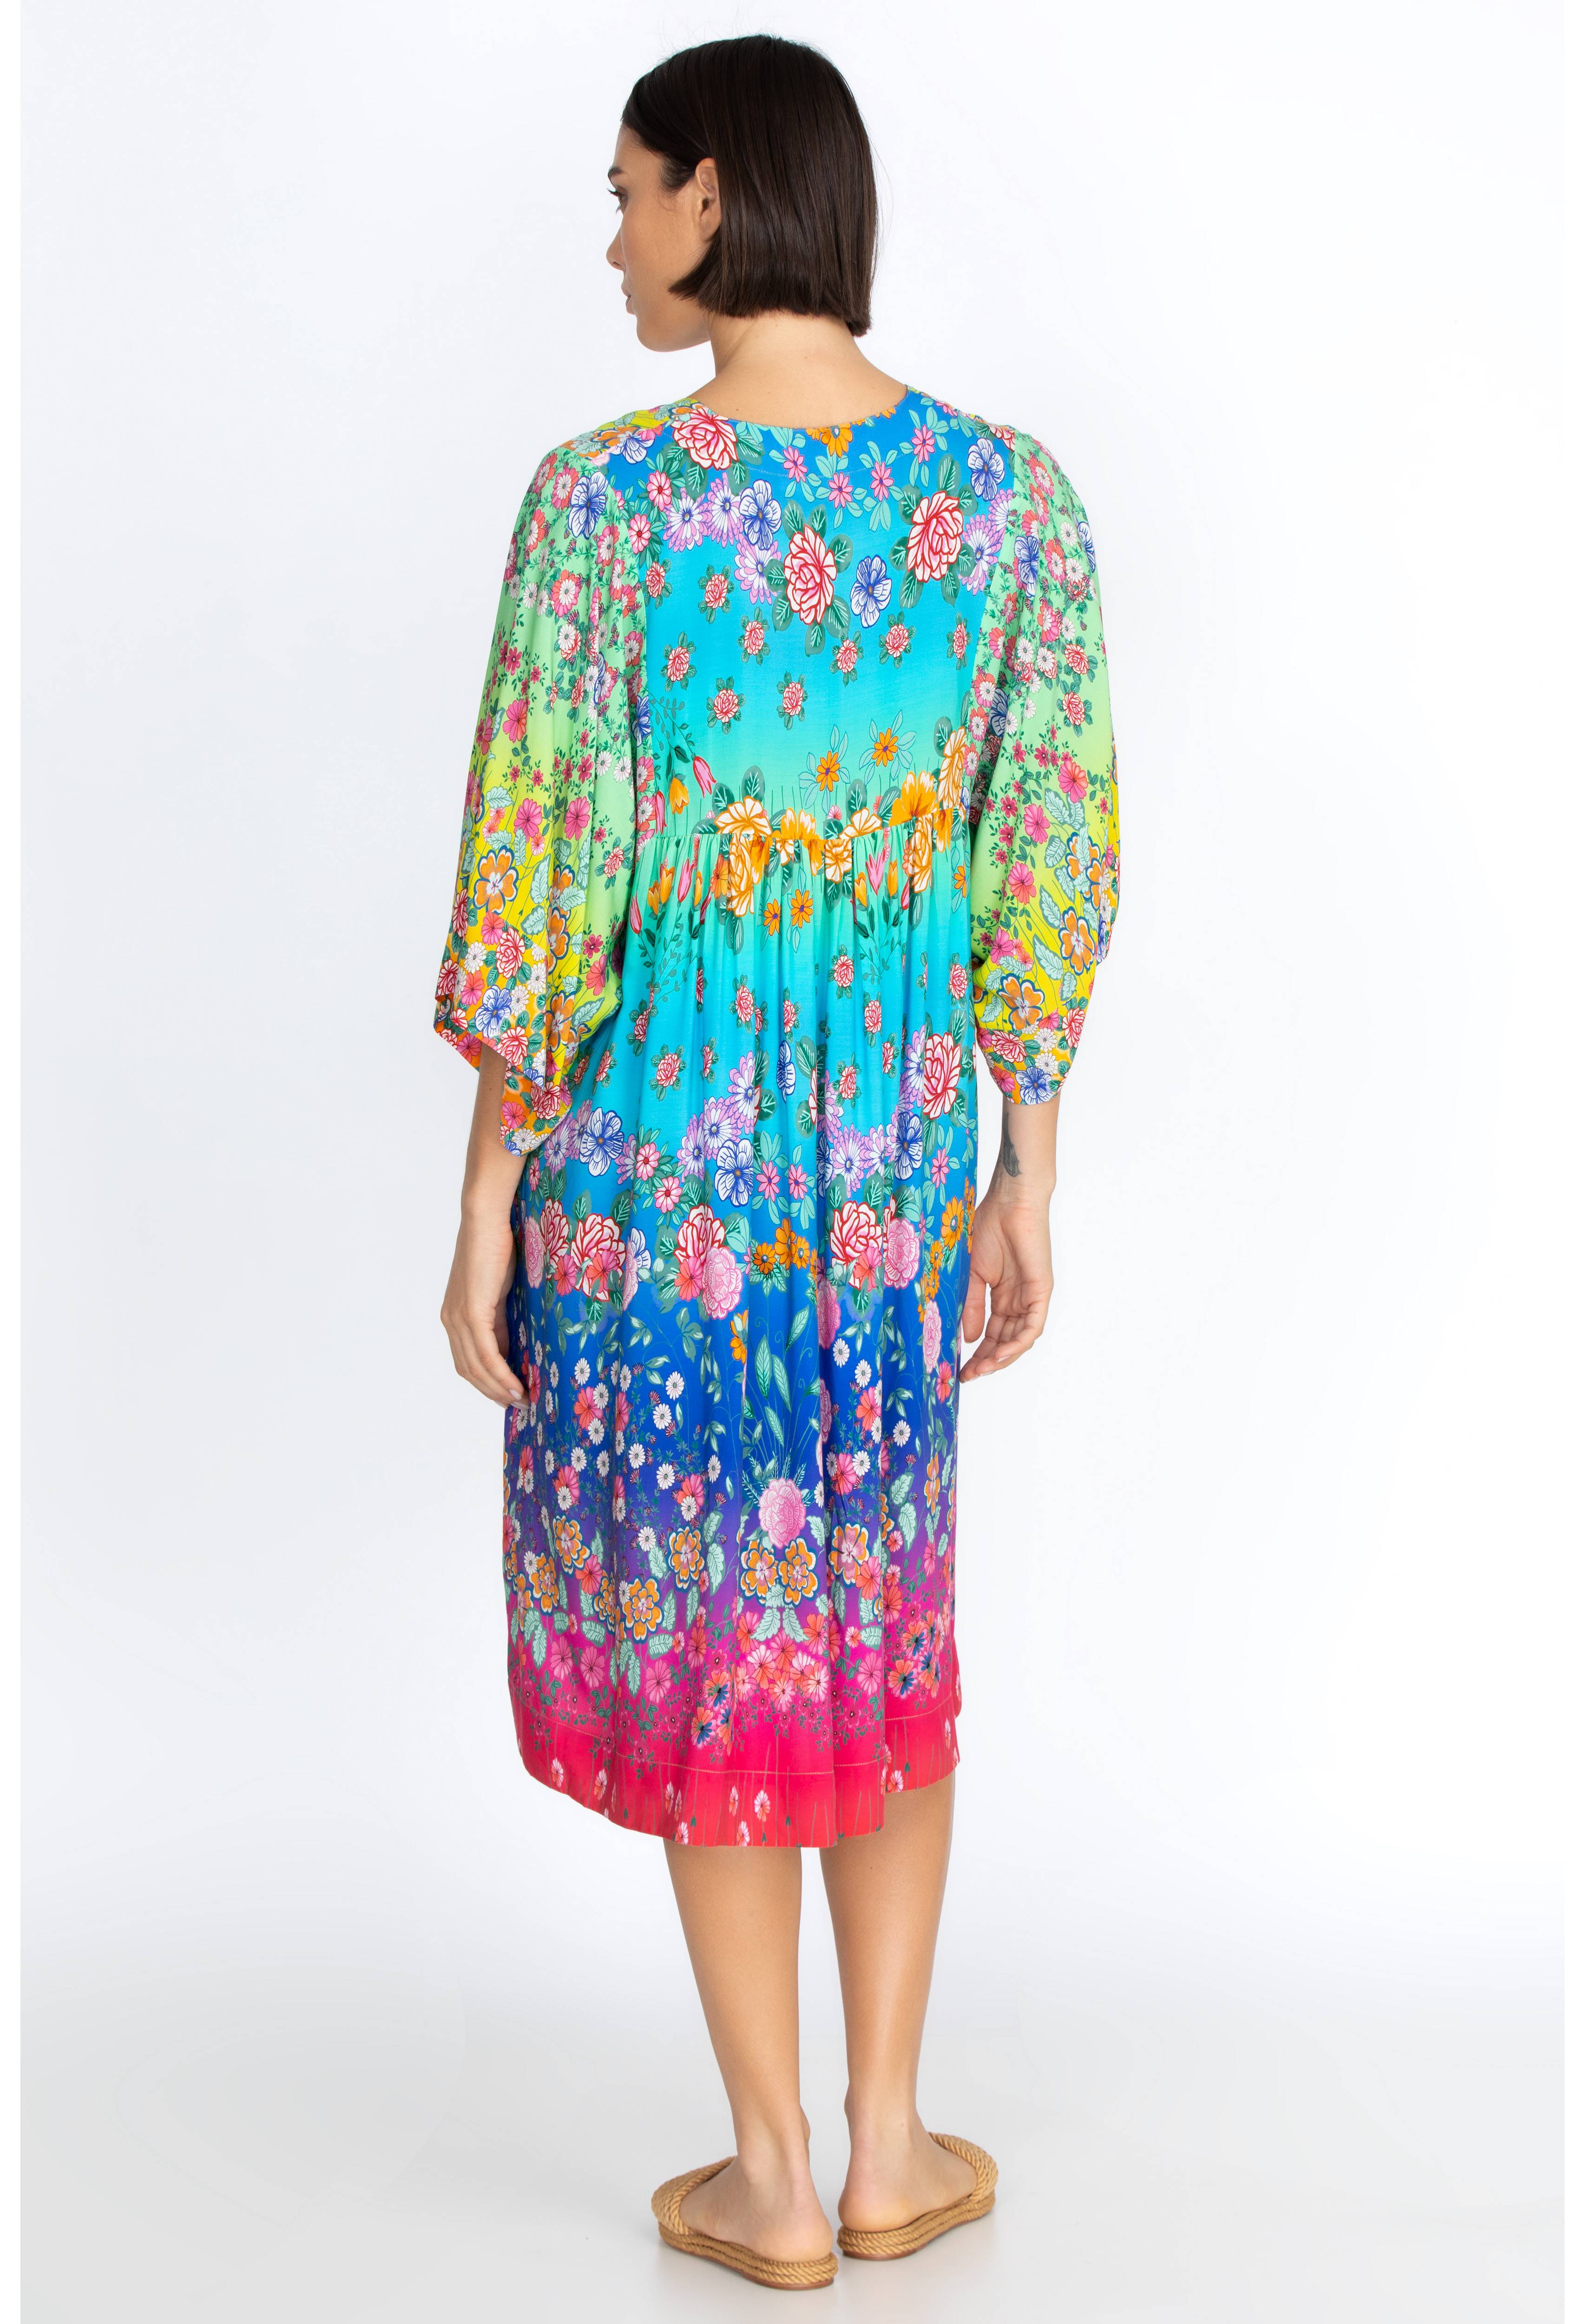 Rainbow Easy Cover-Up Dress, , large image number 4